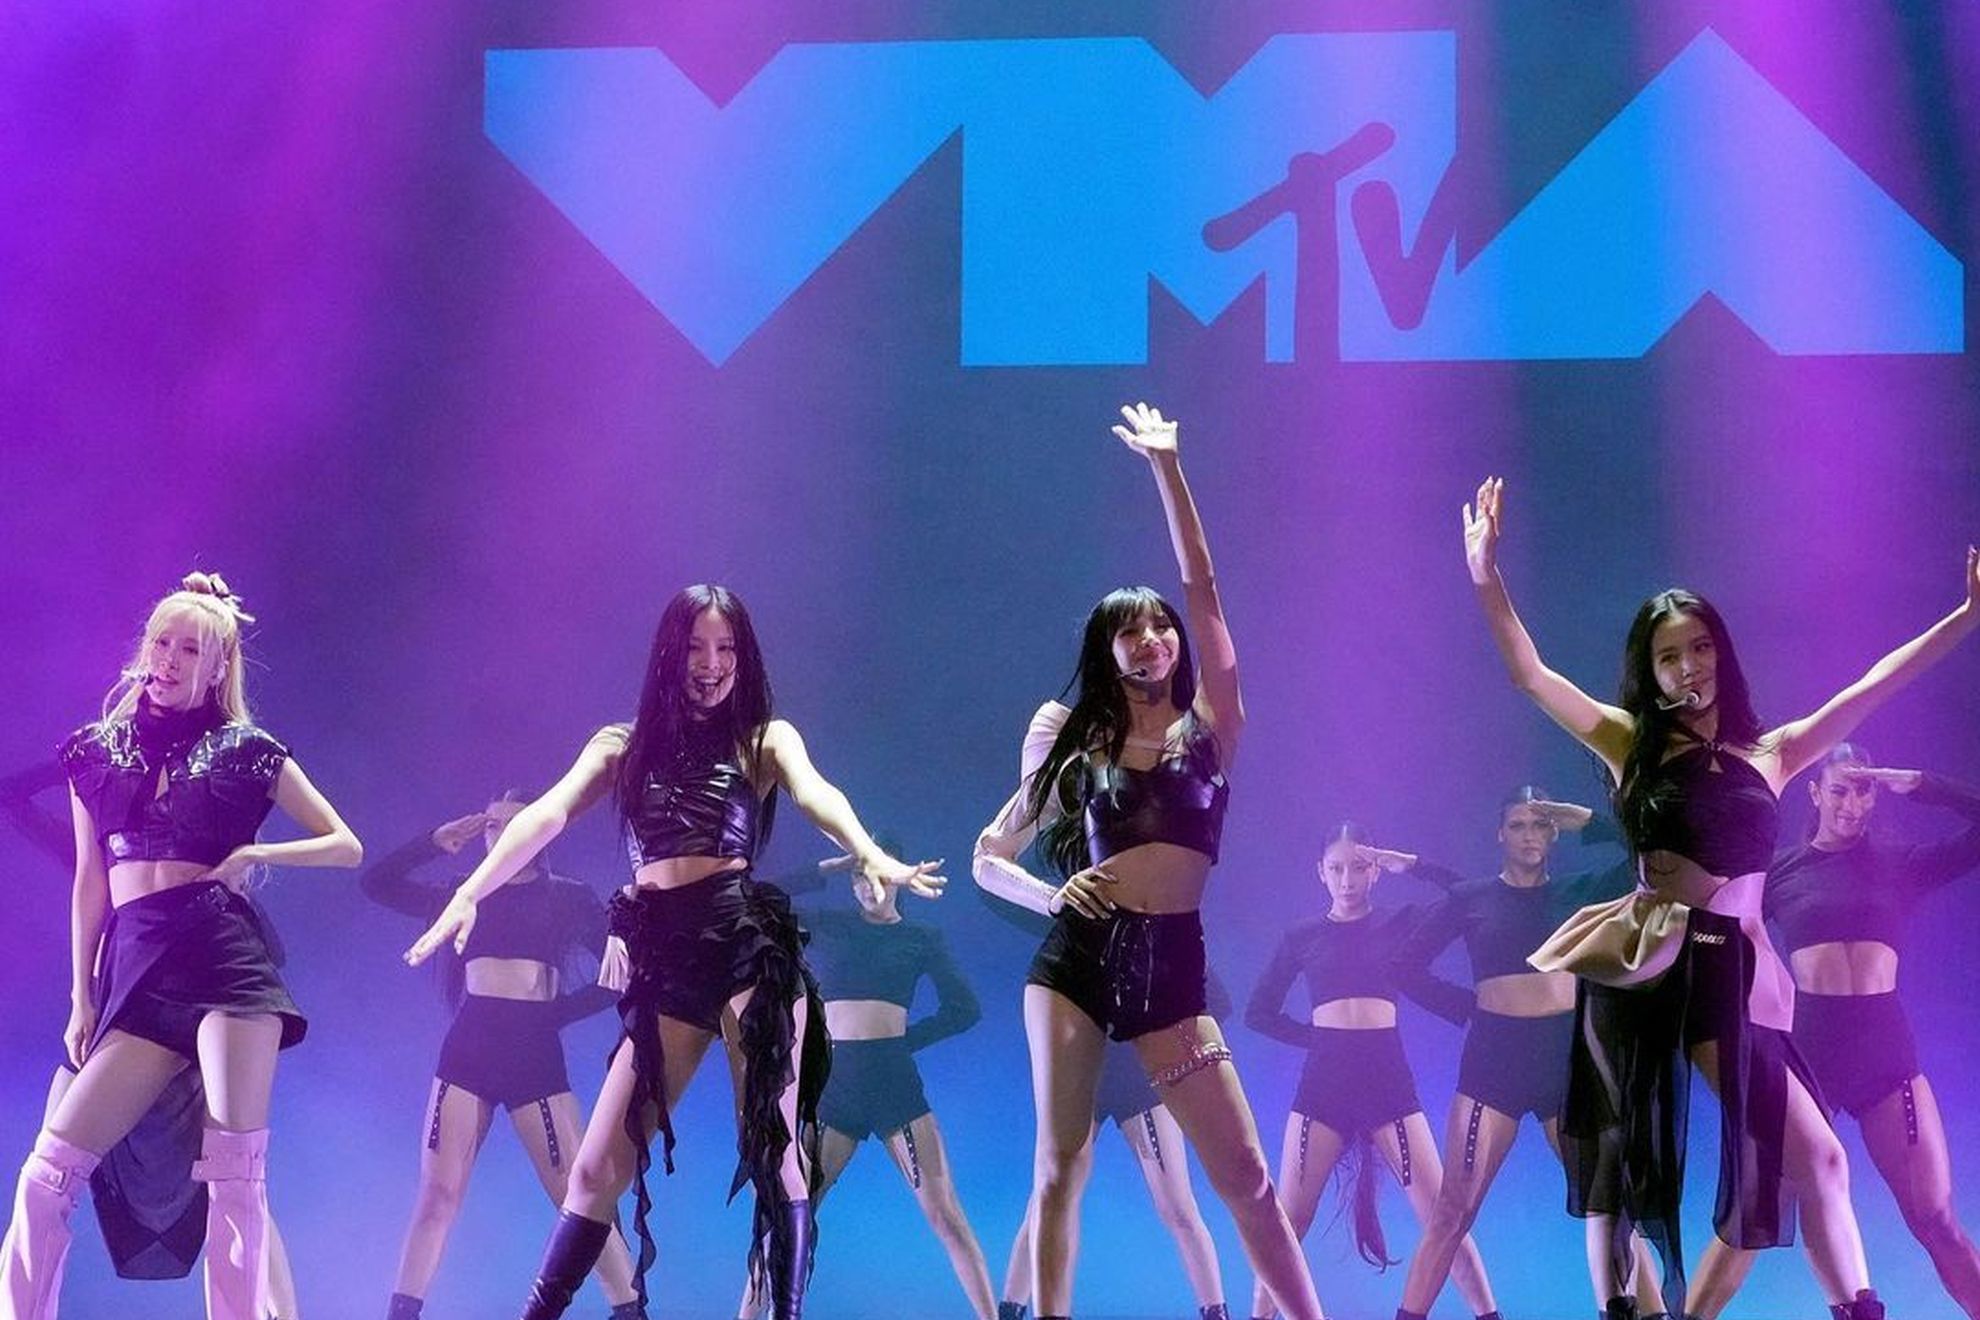 VMA Performers 2023: Who is expected to perform this year at MTV's biggest night?